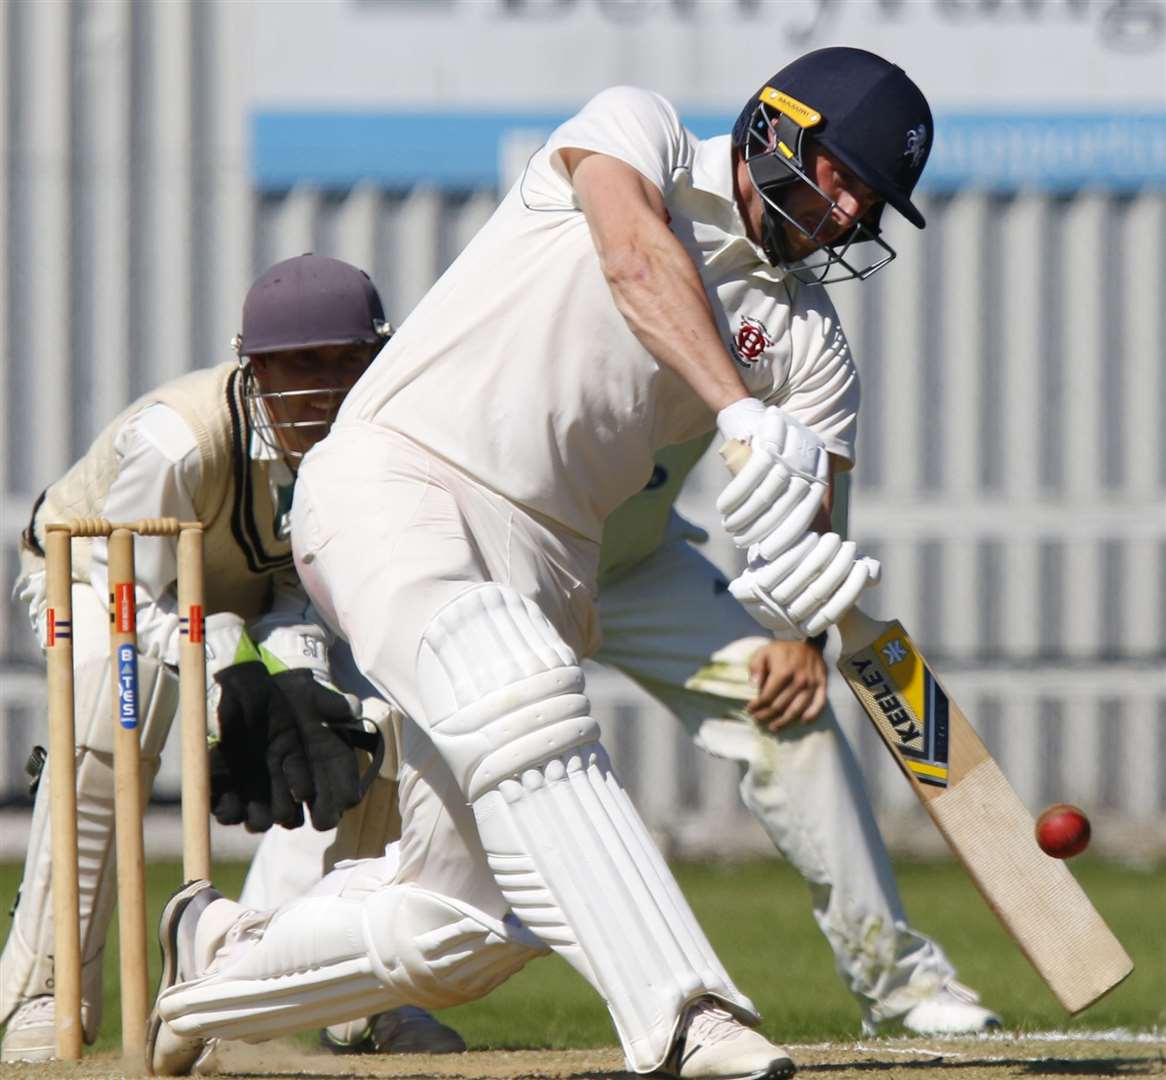 Beckenham's Alex Blake hits a six to seal victory against Lordswood. Picture: Andy Jones